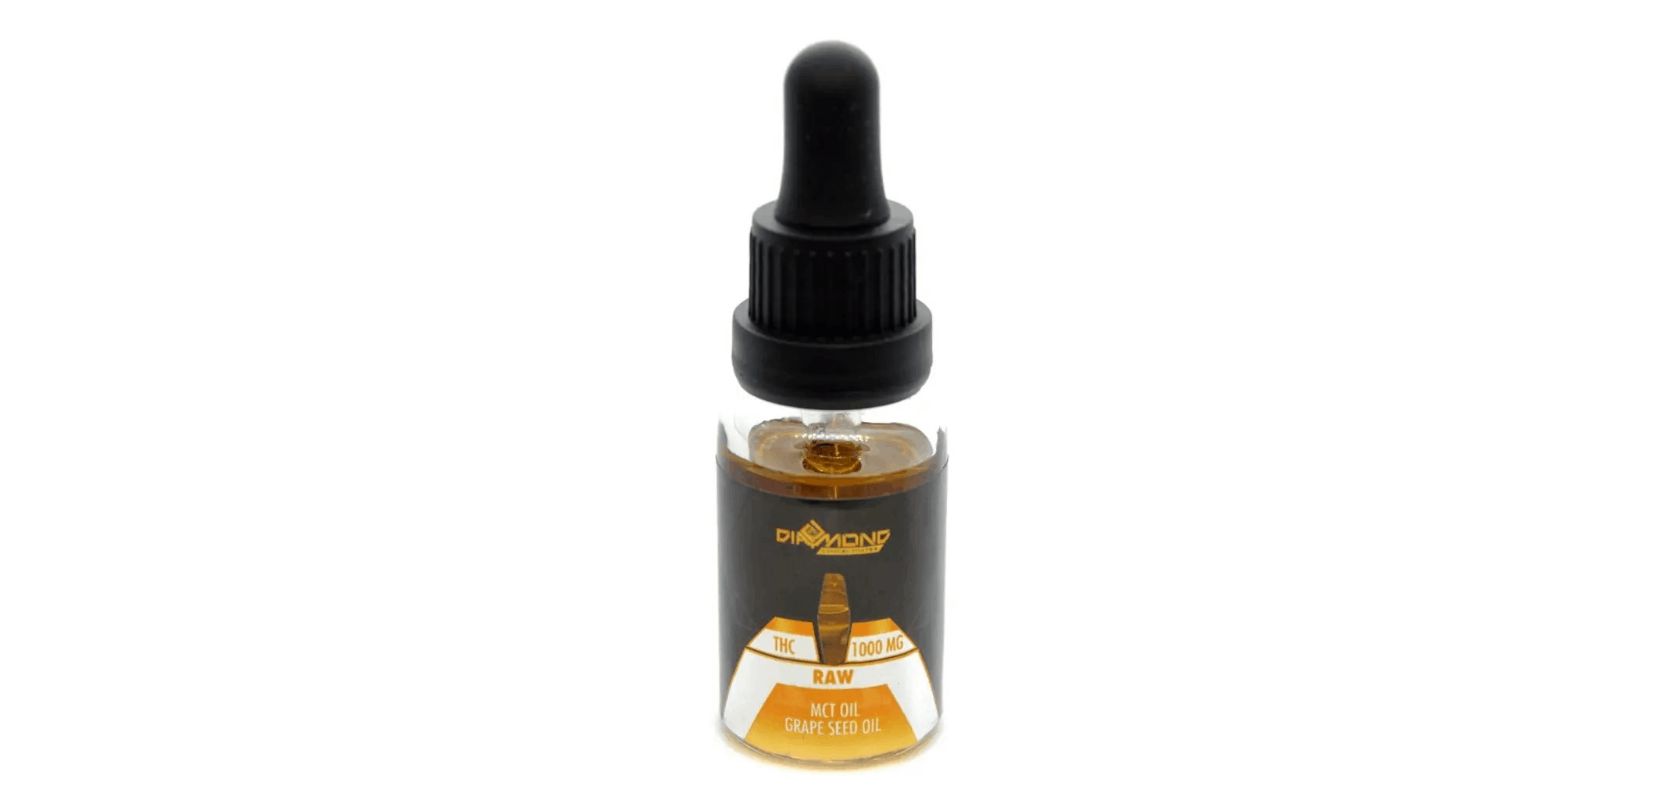 The Diamond Concentrates – 1000mg THC Tincture – Raw is another superb option for people with insomnia, fatigue, inflammation, and chronic pain. 